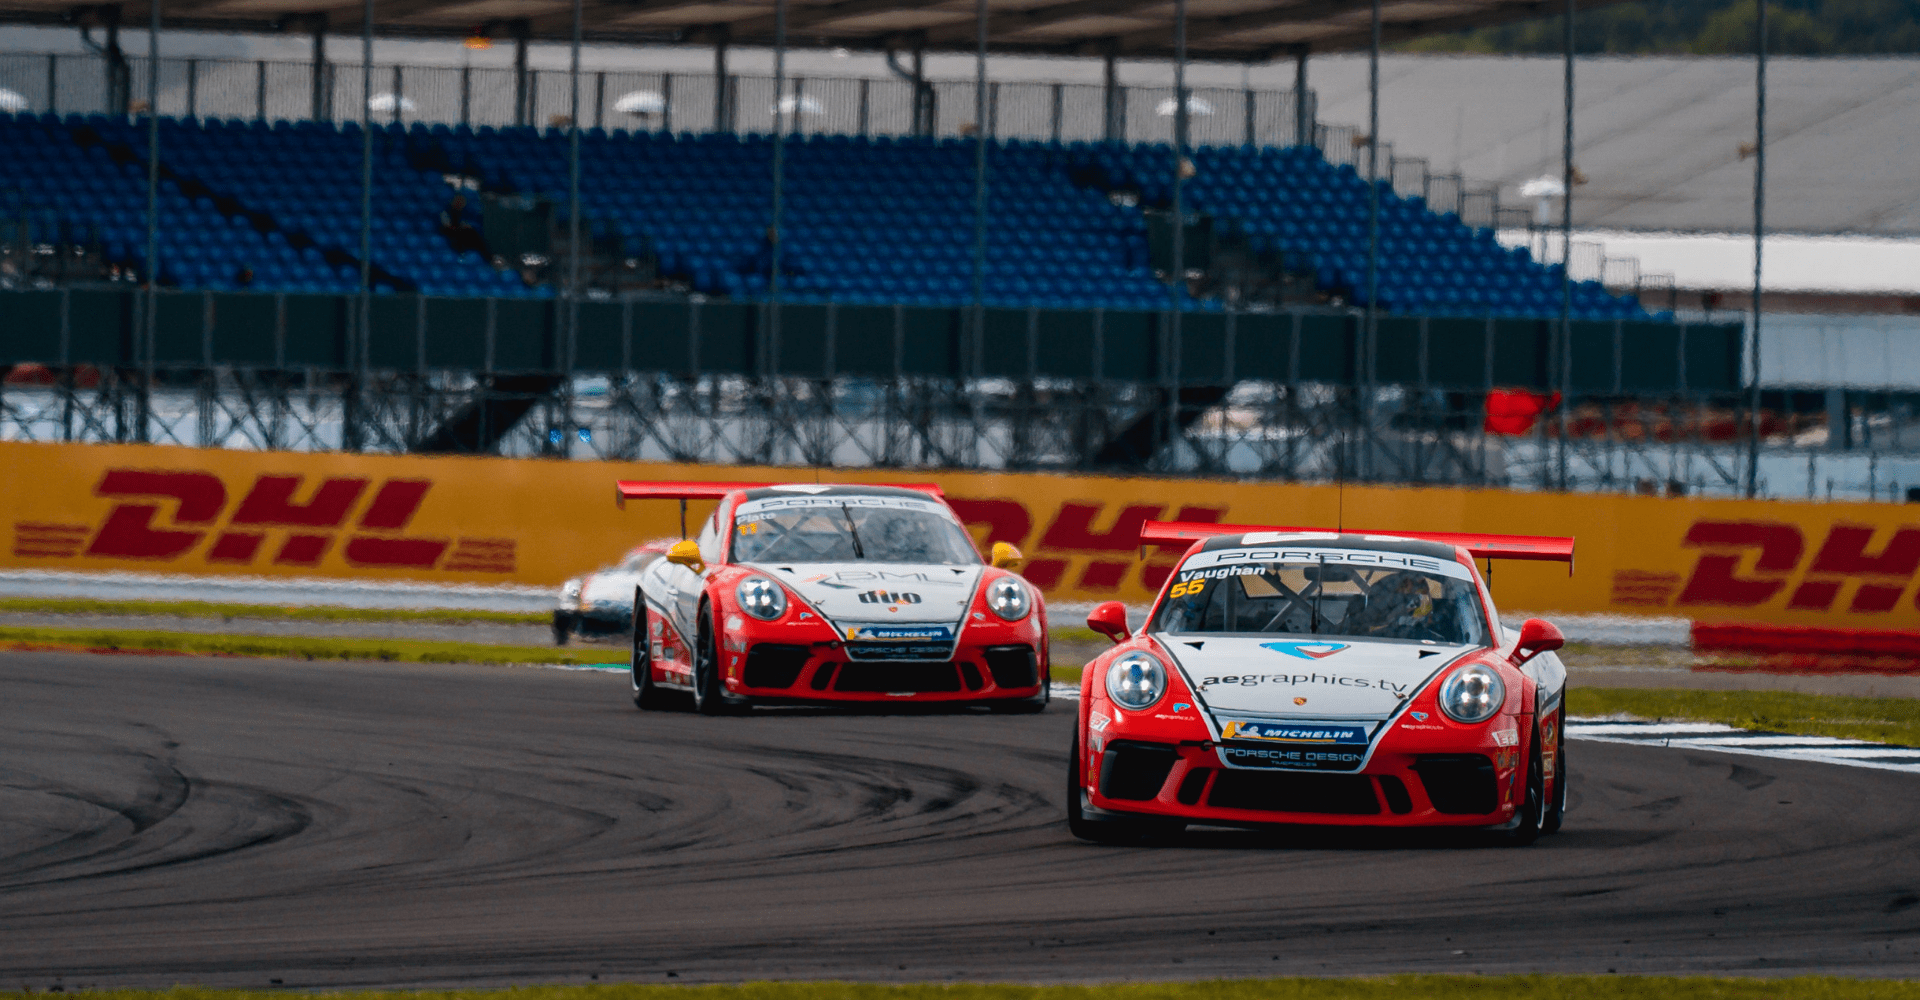 Double podium marks Silverstone success for Motorbase Performance